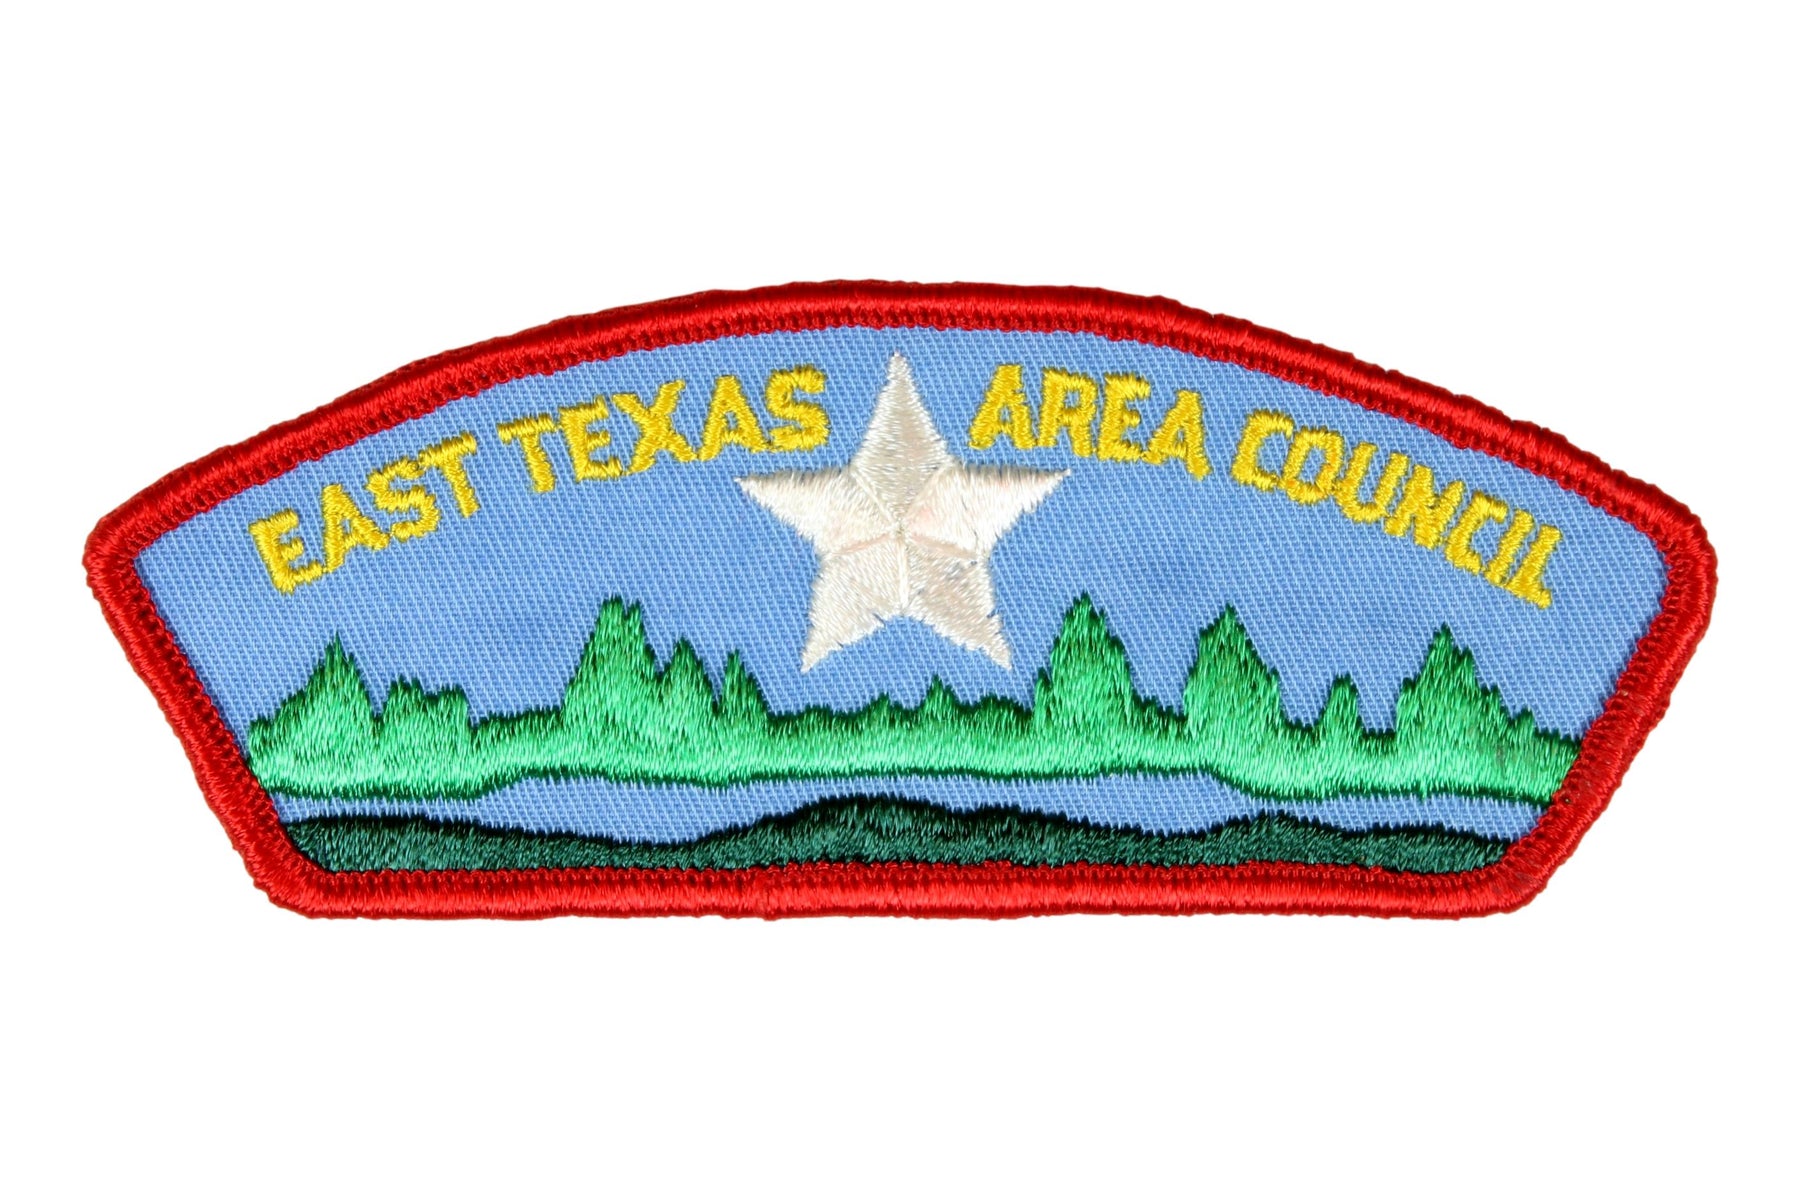 East Texas Area CSP T-1 Gause Back